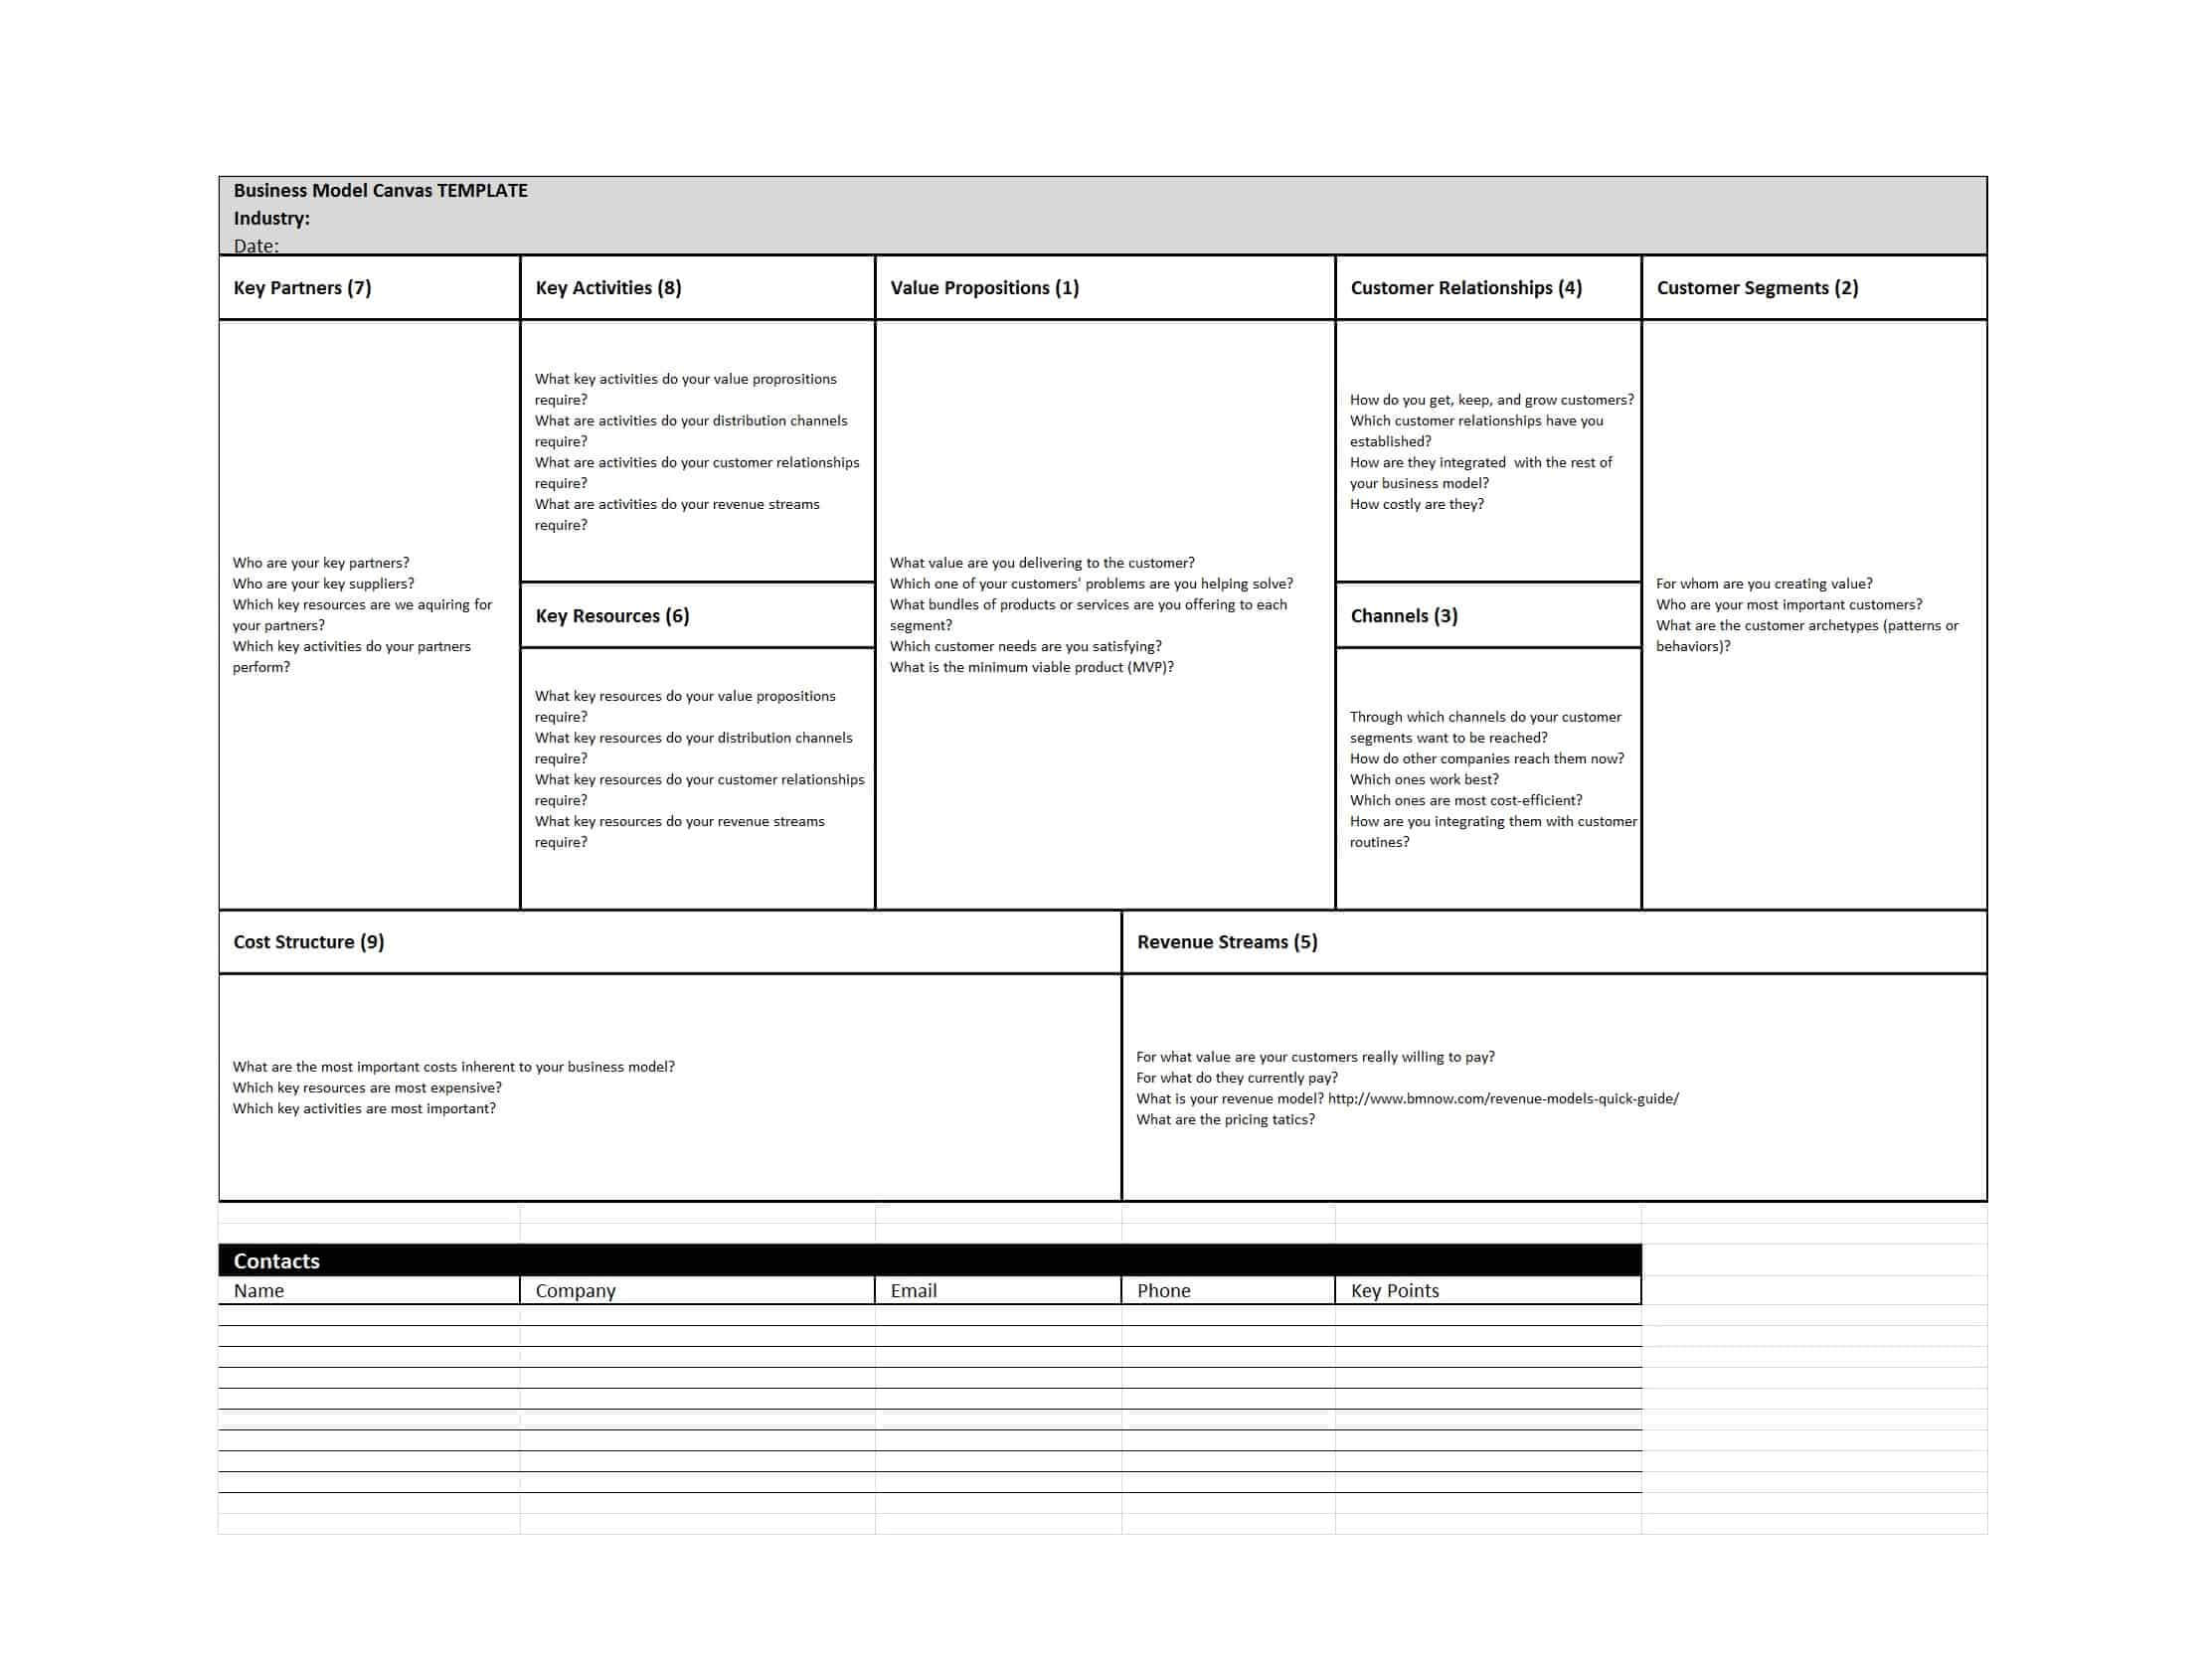 50 Amazing Business Model Canvas Templates ᐅ Template Lab Throughout Business Model Canvas Word Template Download